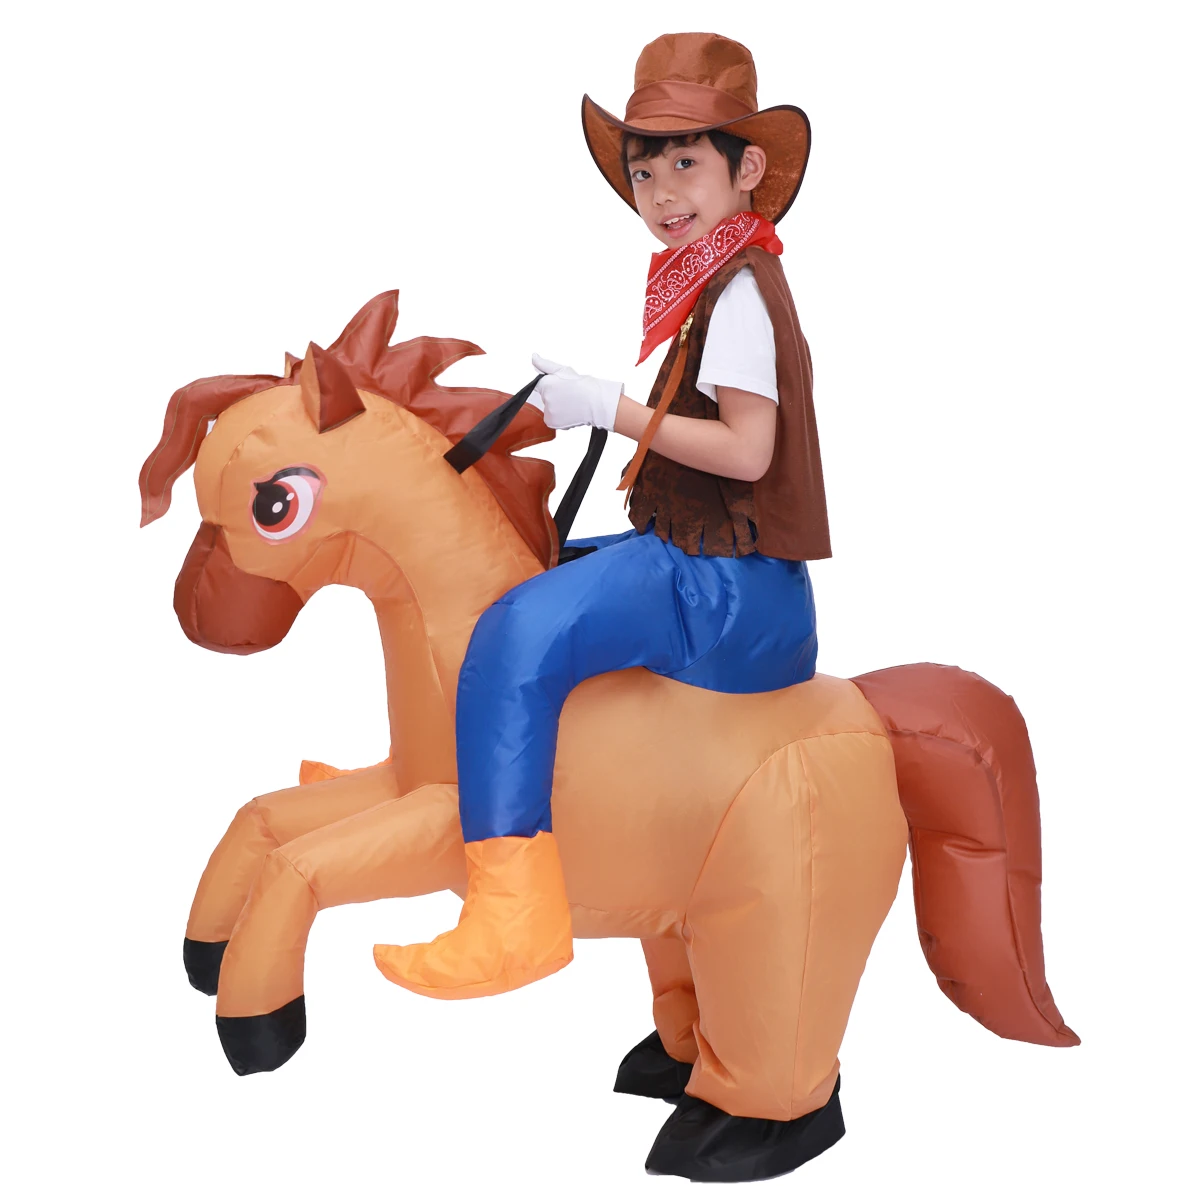 Kids Child Inflatable Horse Costume Cosplay Girls Boys Cowboy Ride Horse Funny Halloween Purim Party Inflated Garment Disfraces funny adult green printed mascot dinosaur inflatable costume christmas halloween cosplay costume t rex party role play disfraces